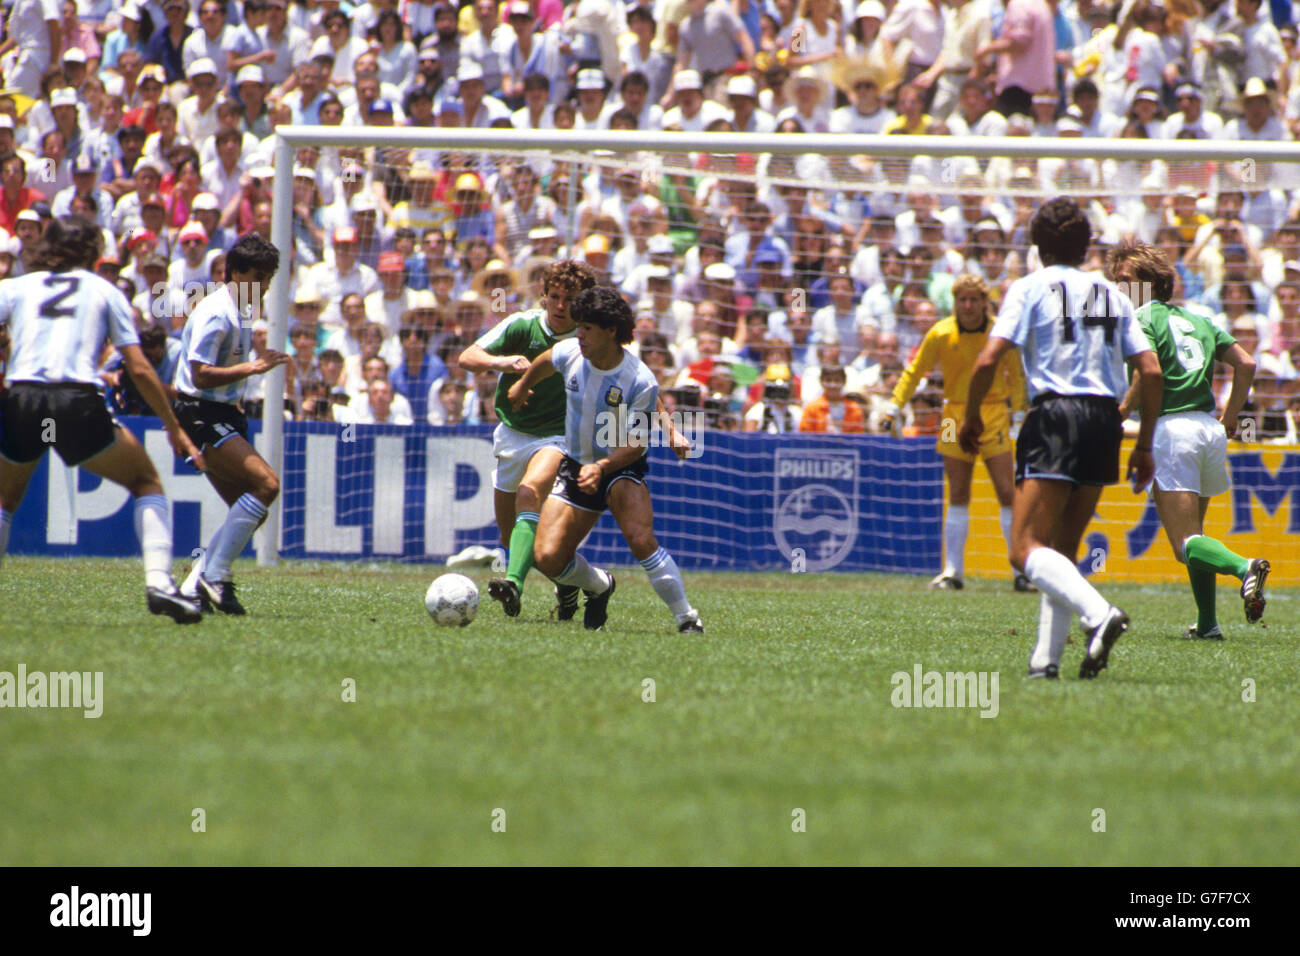 Soccer - 1986 FIFA World Cup Mexico 86 - Final - Argentina v West